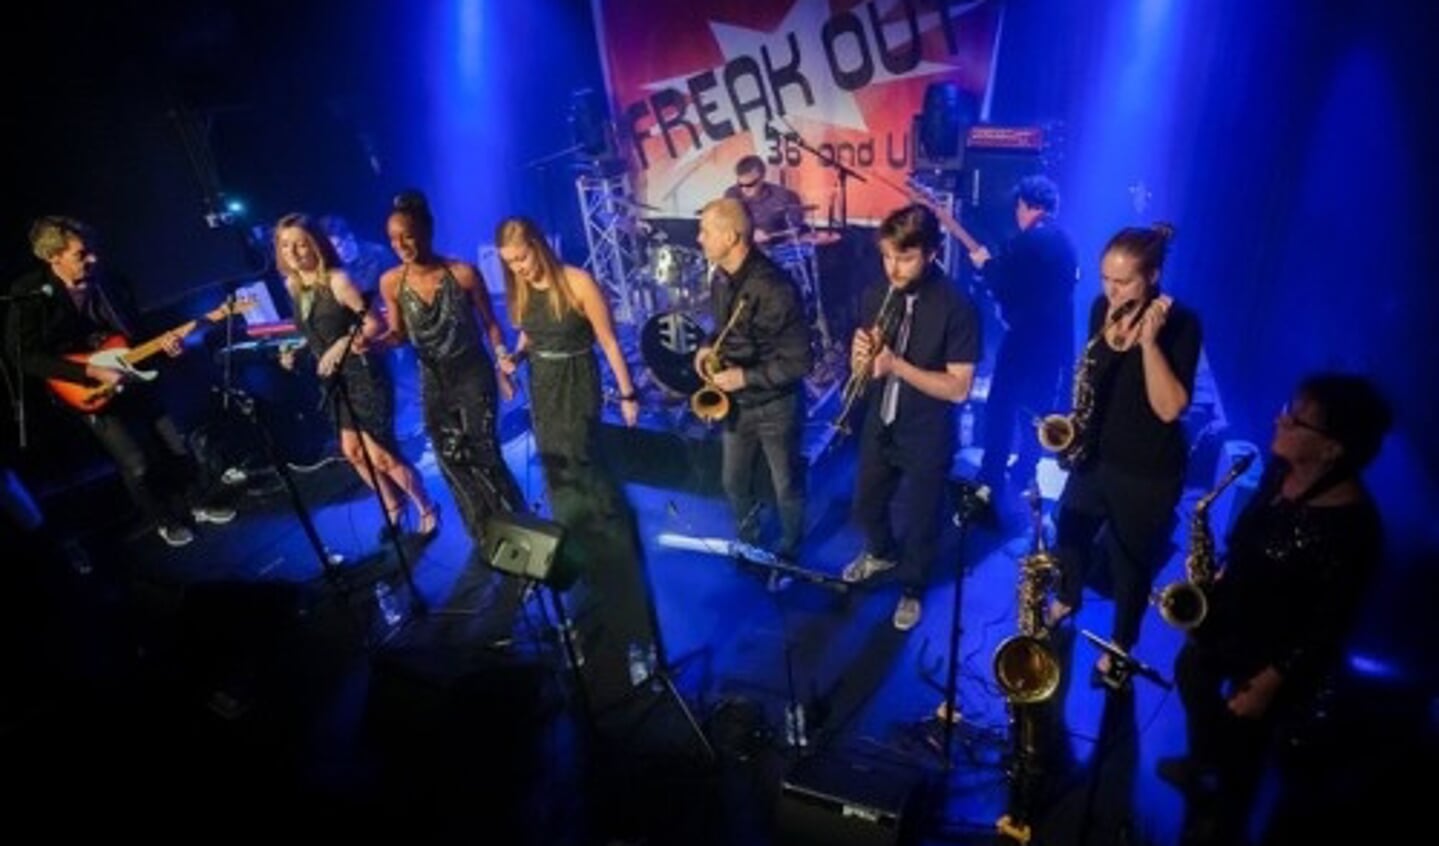 Freakout Soulparty